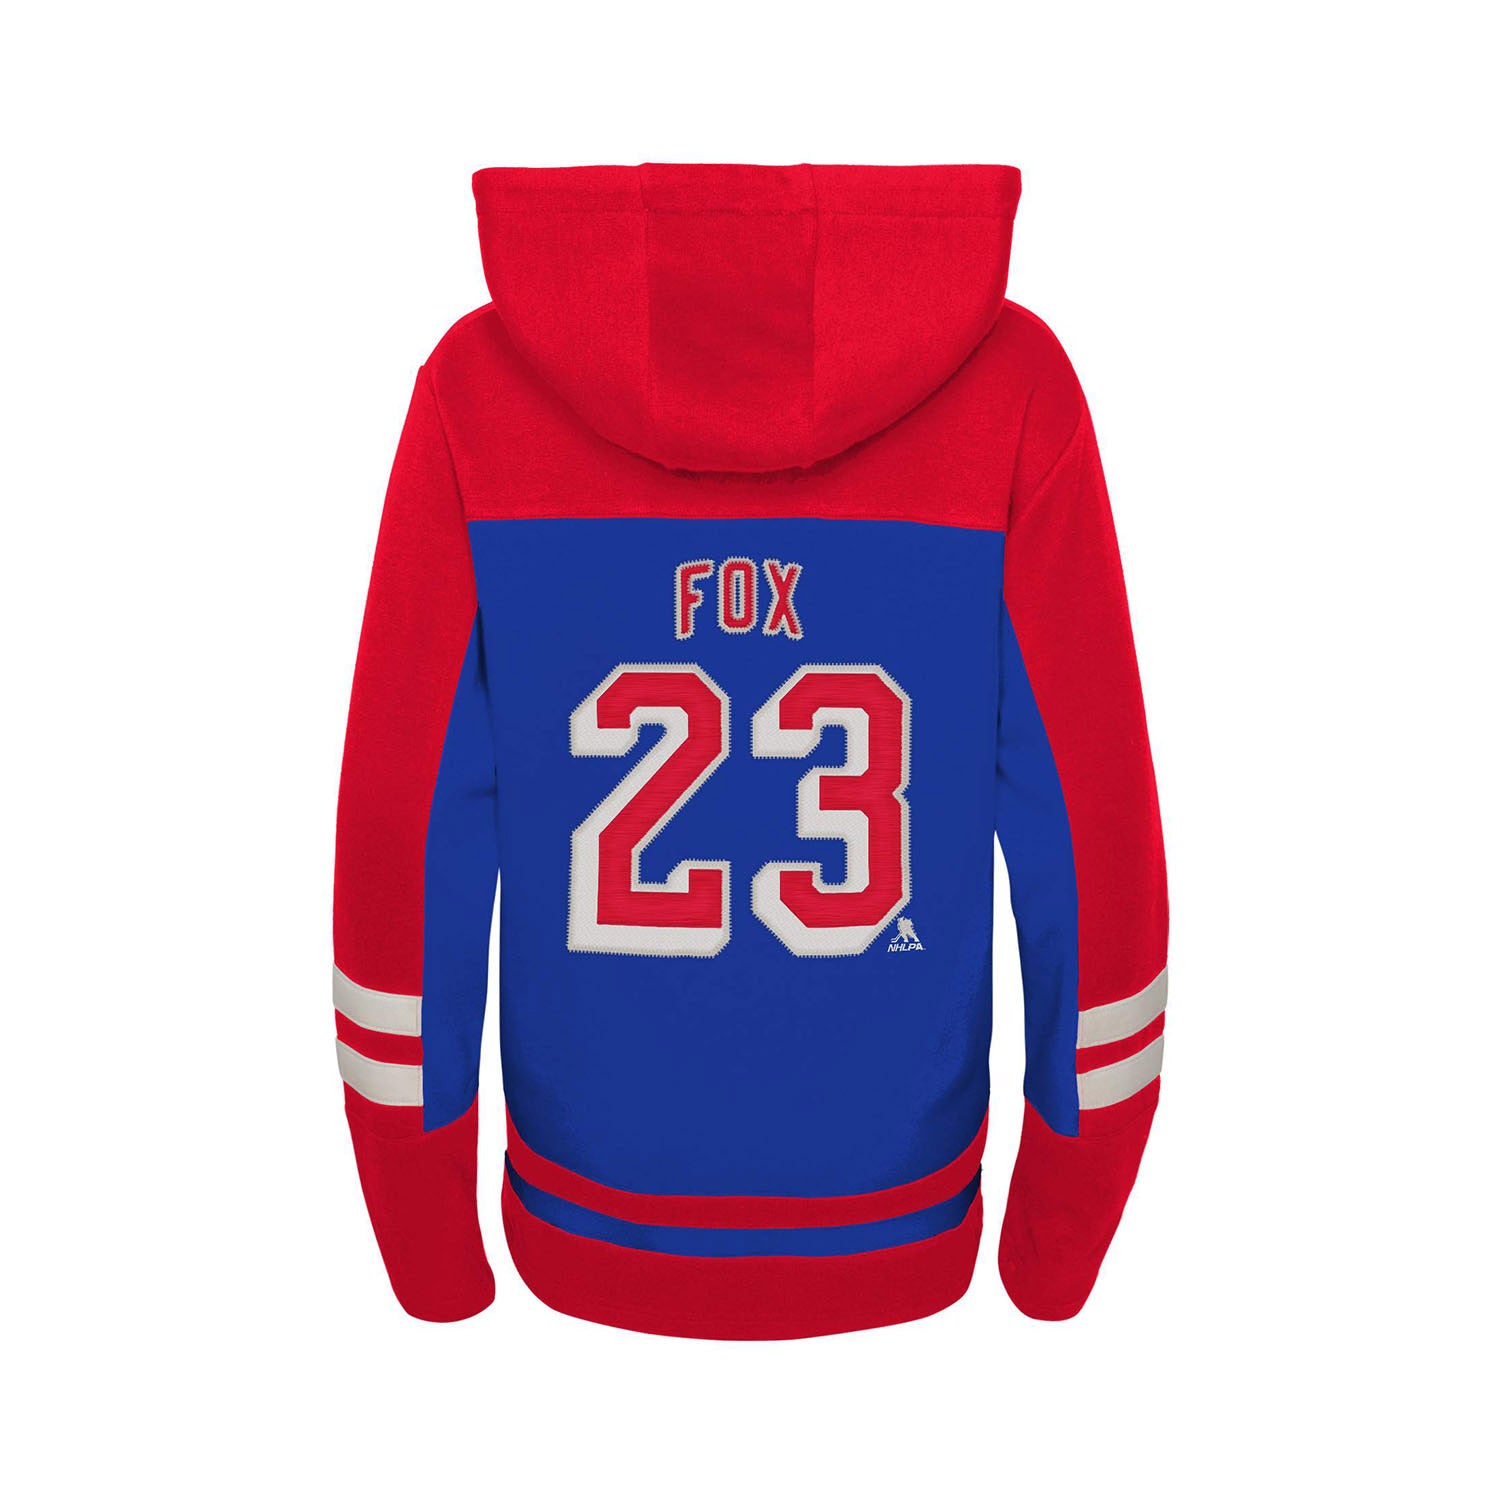 Outerstuff Youth NHL New York Rangers '22-'23 Special Edition Pullover Hoodie - XL Each